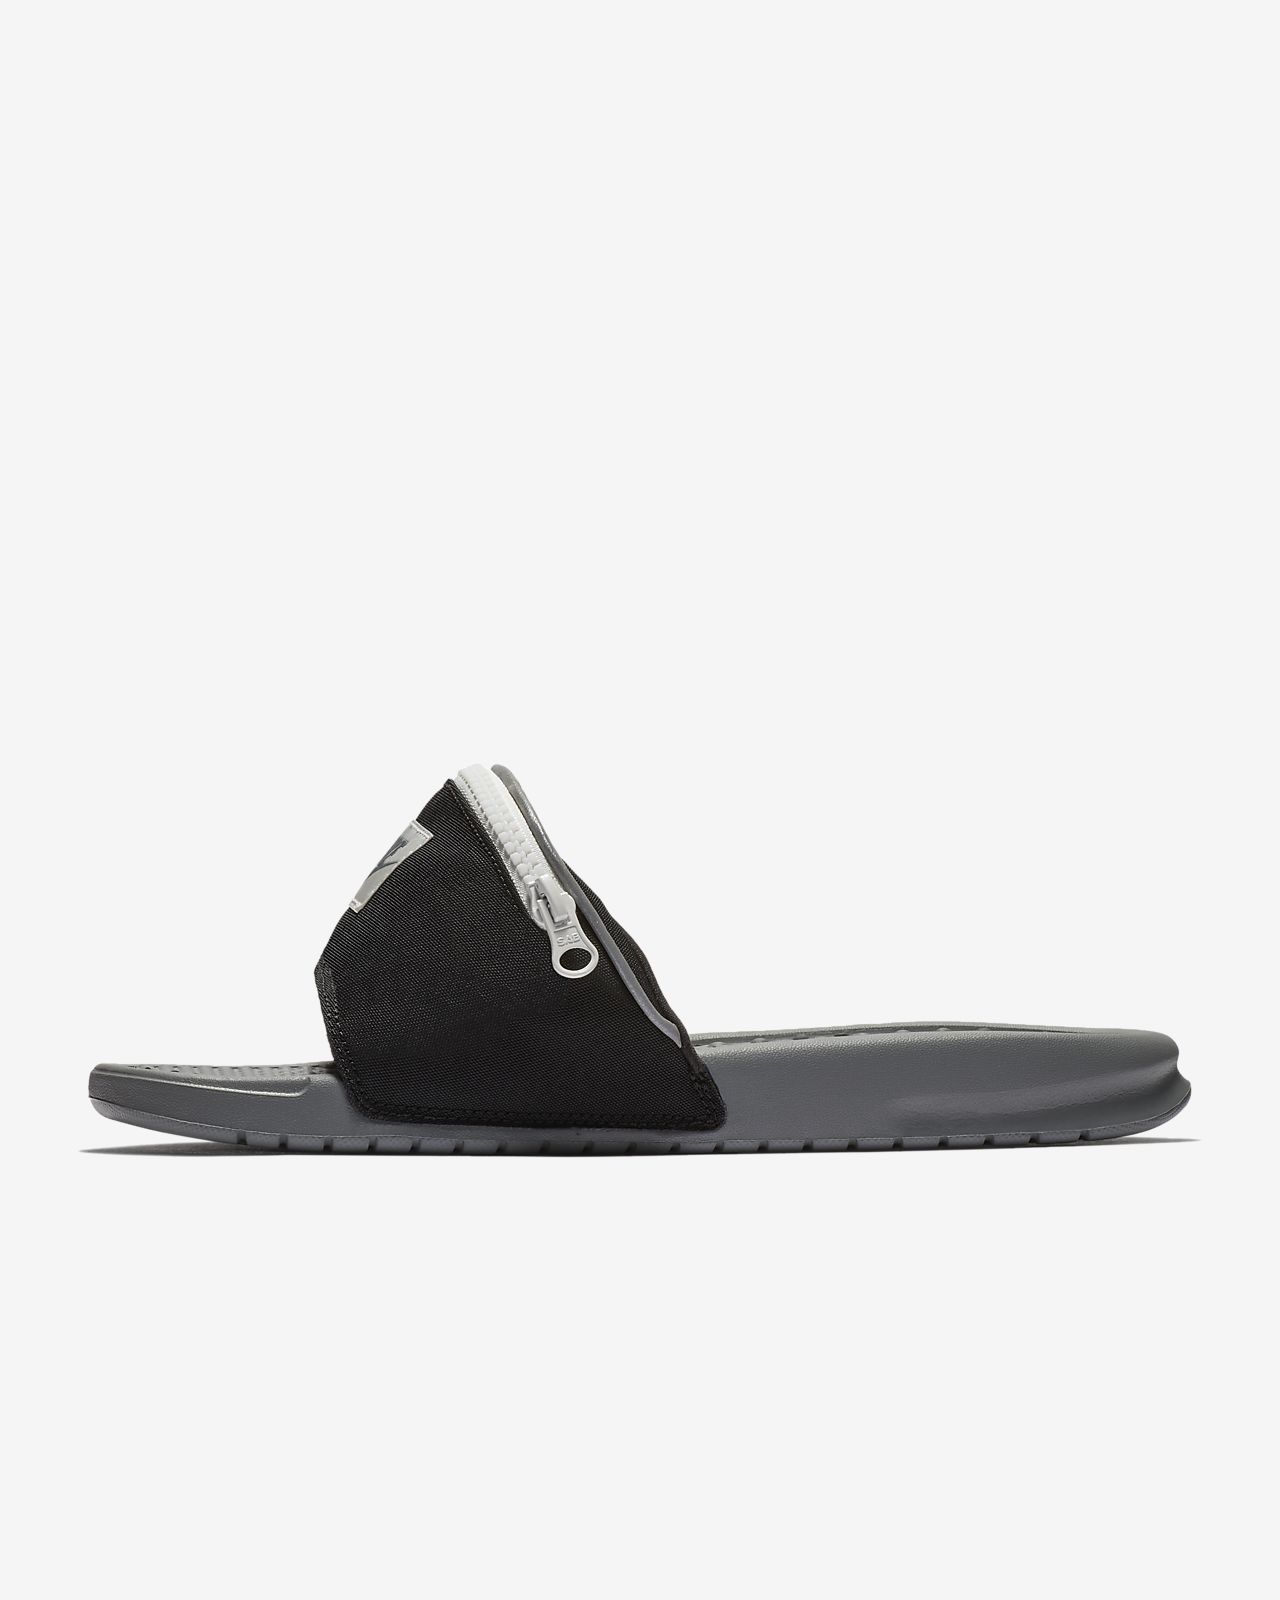 nike slides with a fanny pack